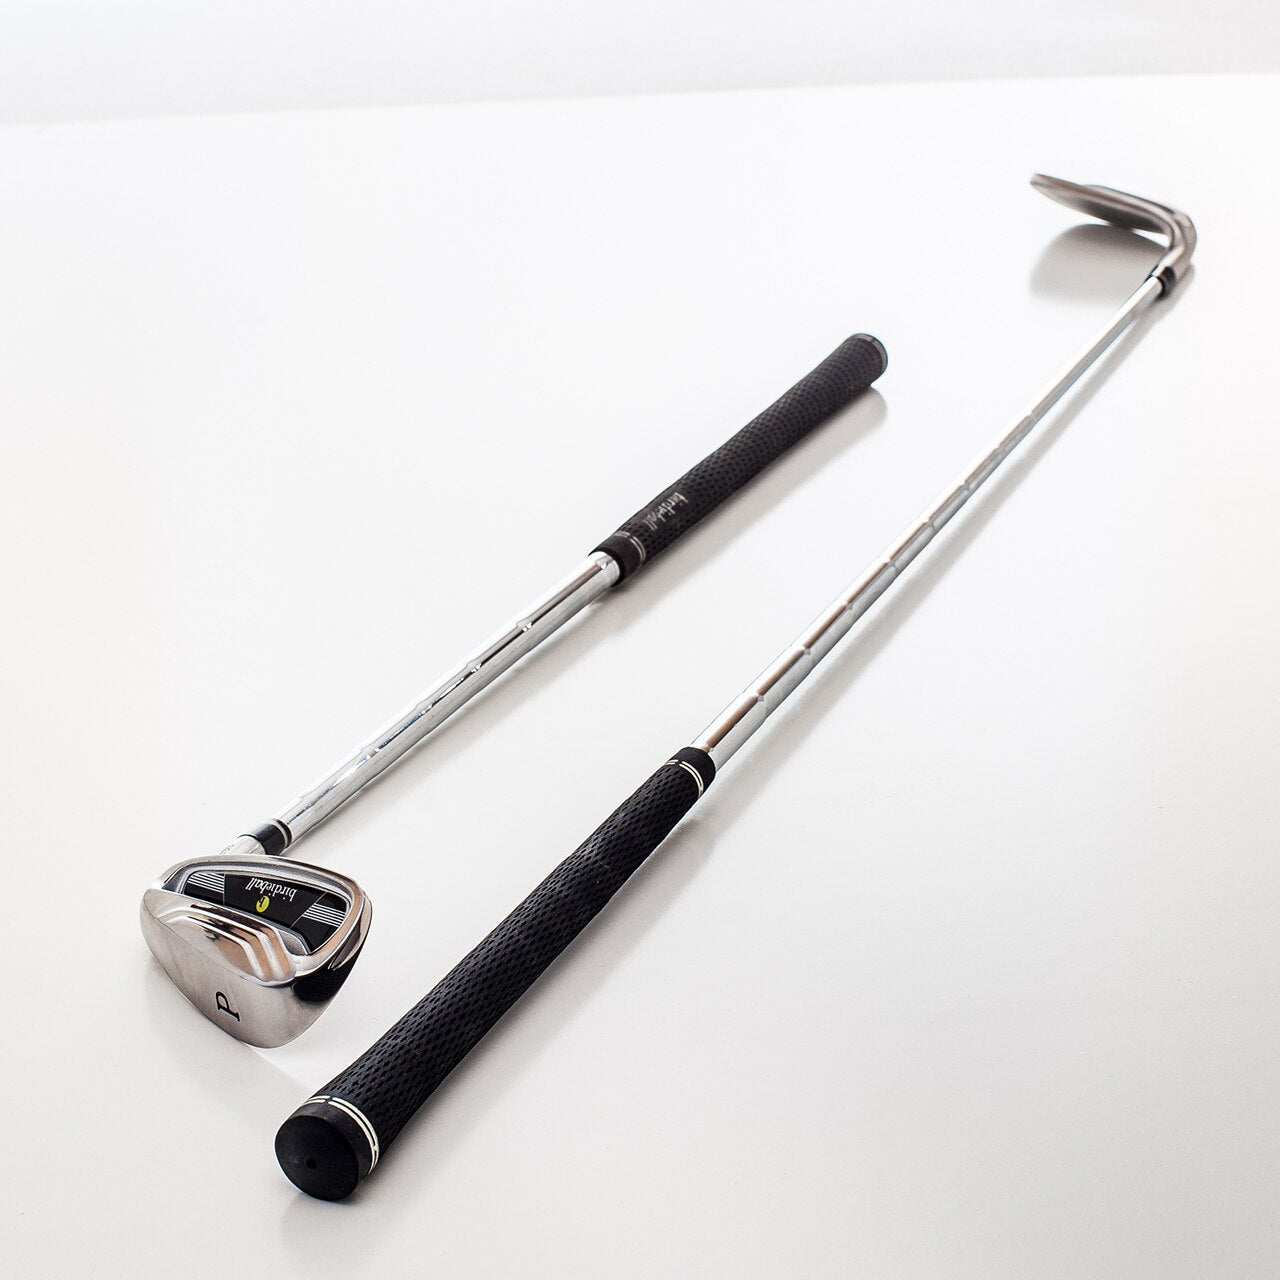 Telescoping/Collapsing Travel Club (7 Iron or Pitching Wedge